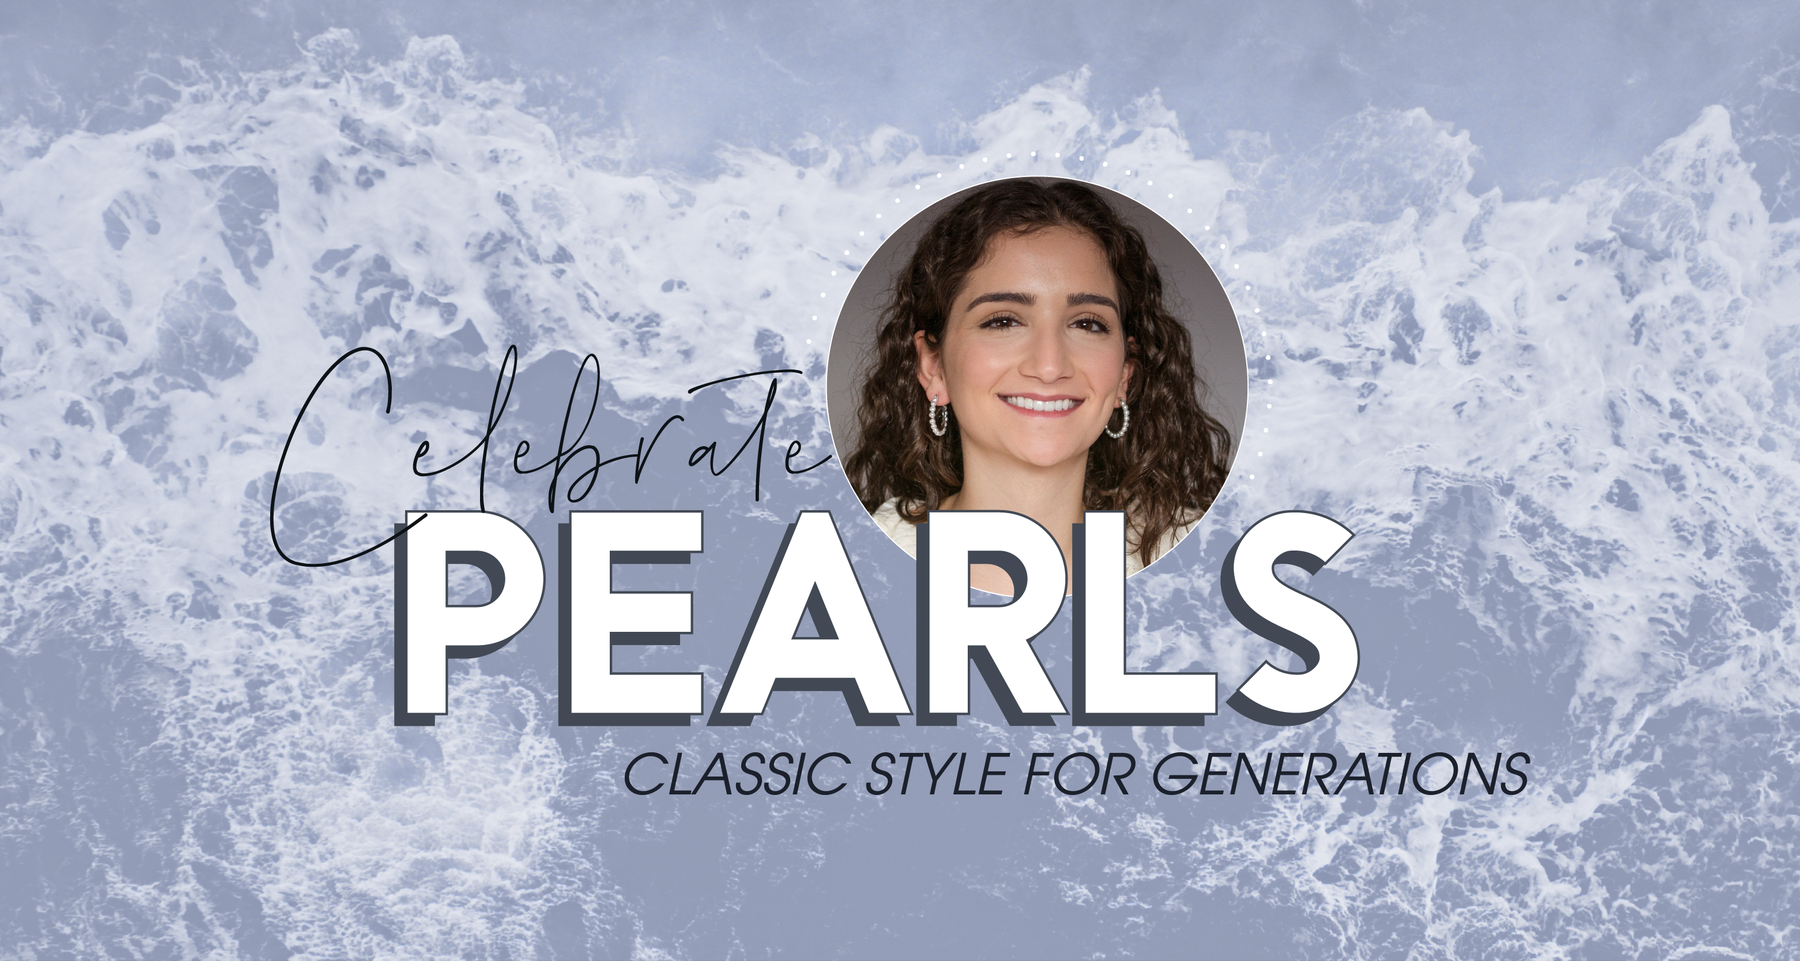 Celebrate Pearls: Classic Style for Generations